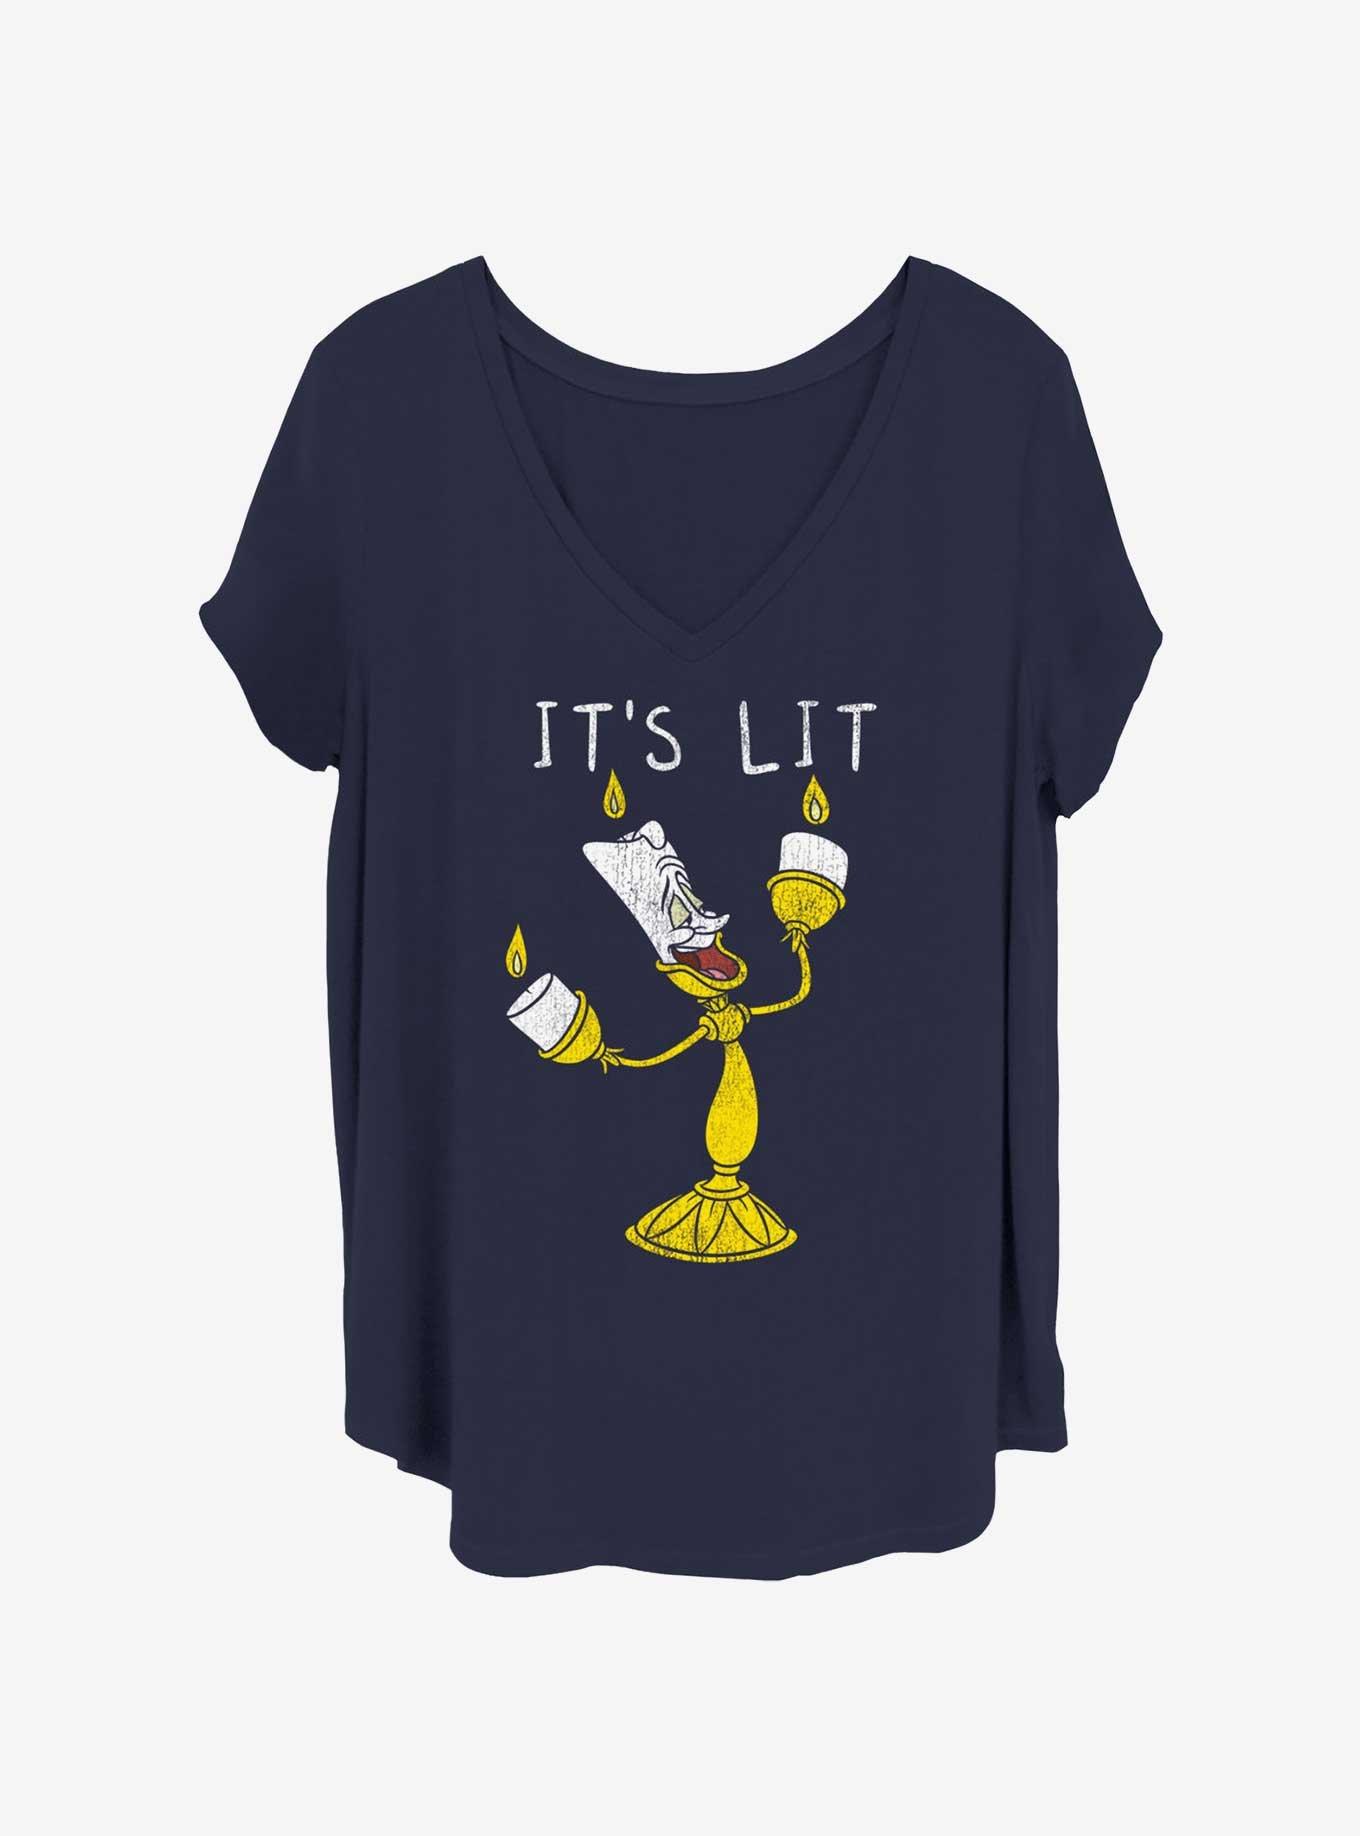 Disney Beauty and the Beast It's Lit Girls T-Shirt Plus Size, NAVY, hi-res